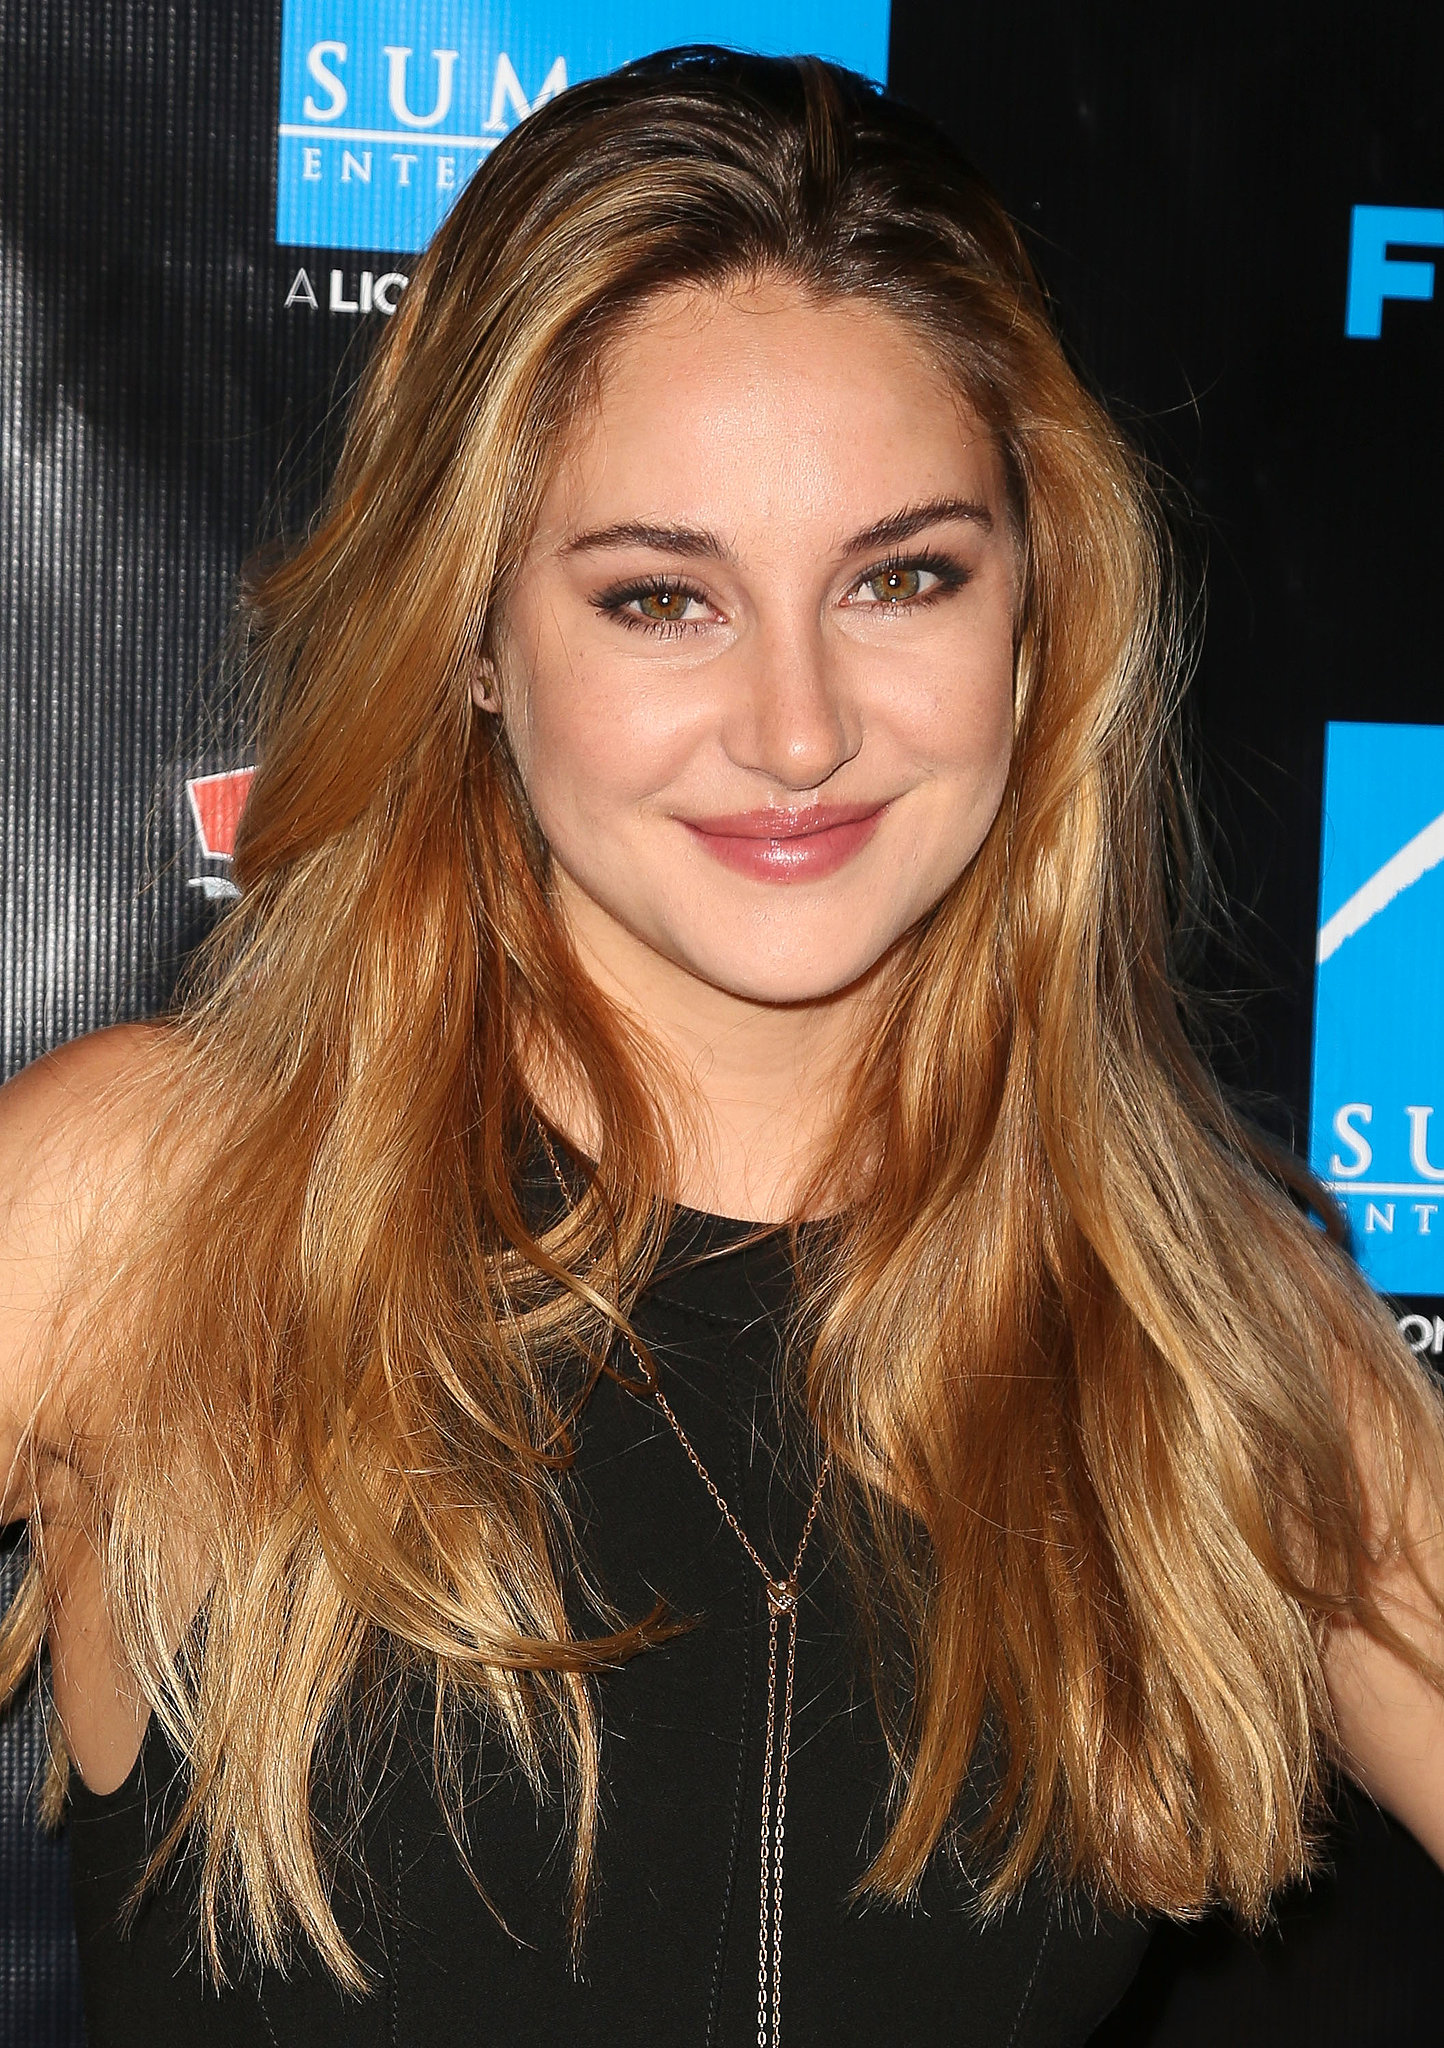 With Her New Blond Hair On Display Shailene Woodley Opted For A Sexy